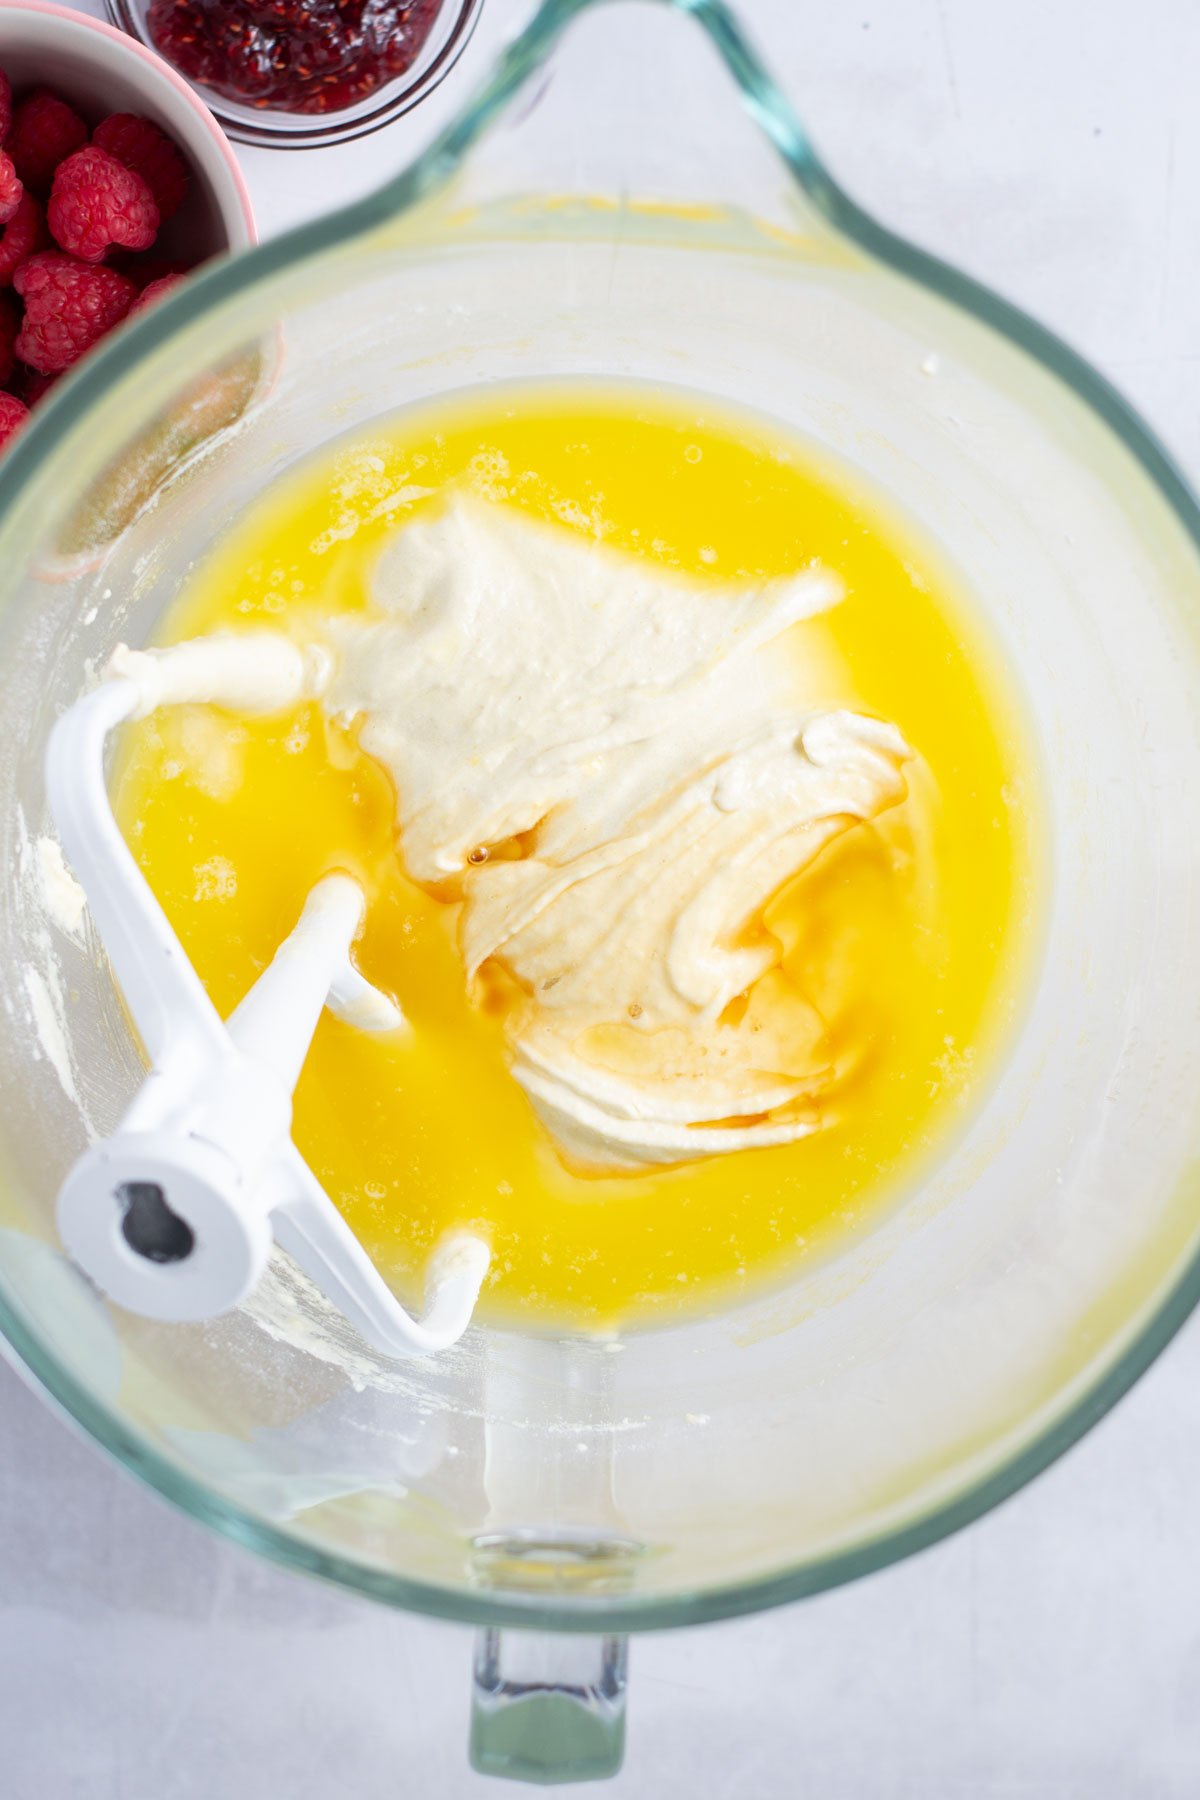 melted butter, vanilla and almond extract added to the cake batter